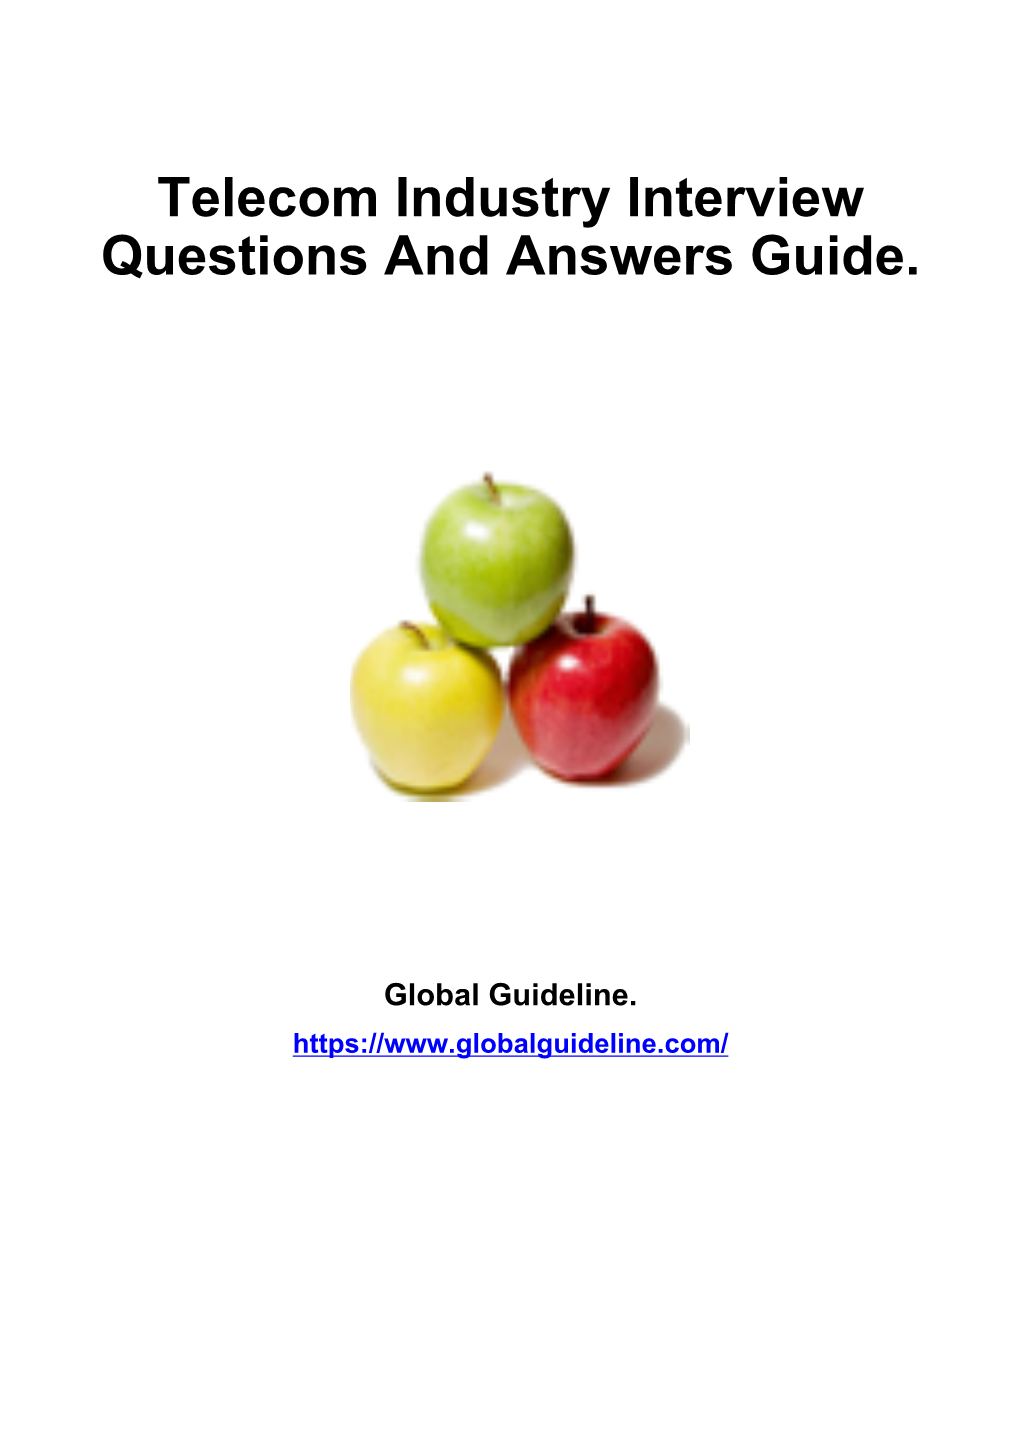 Telecom Industry Interview Questions and Answers Guide